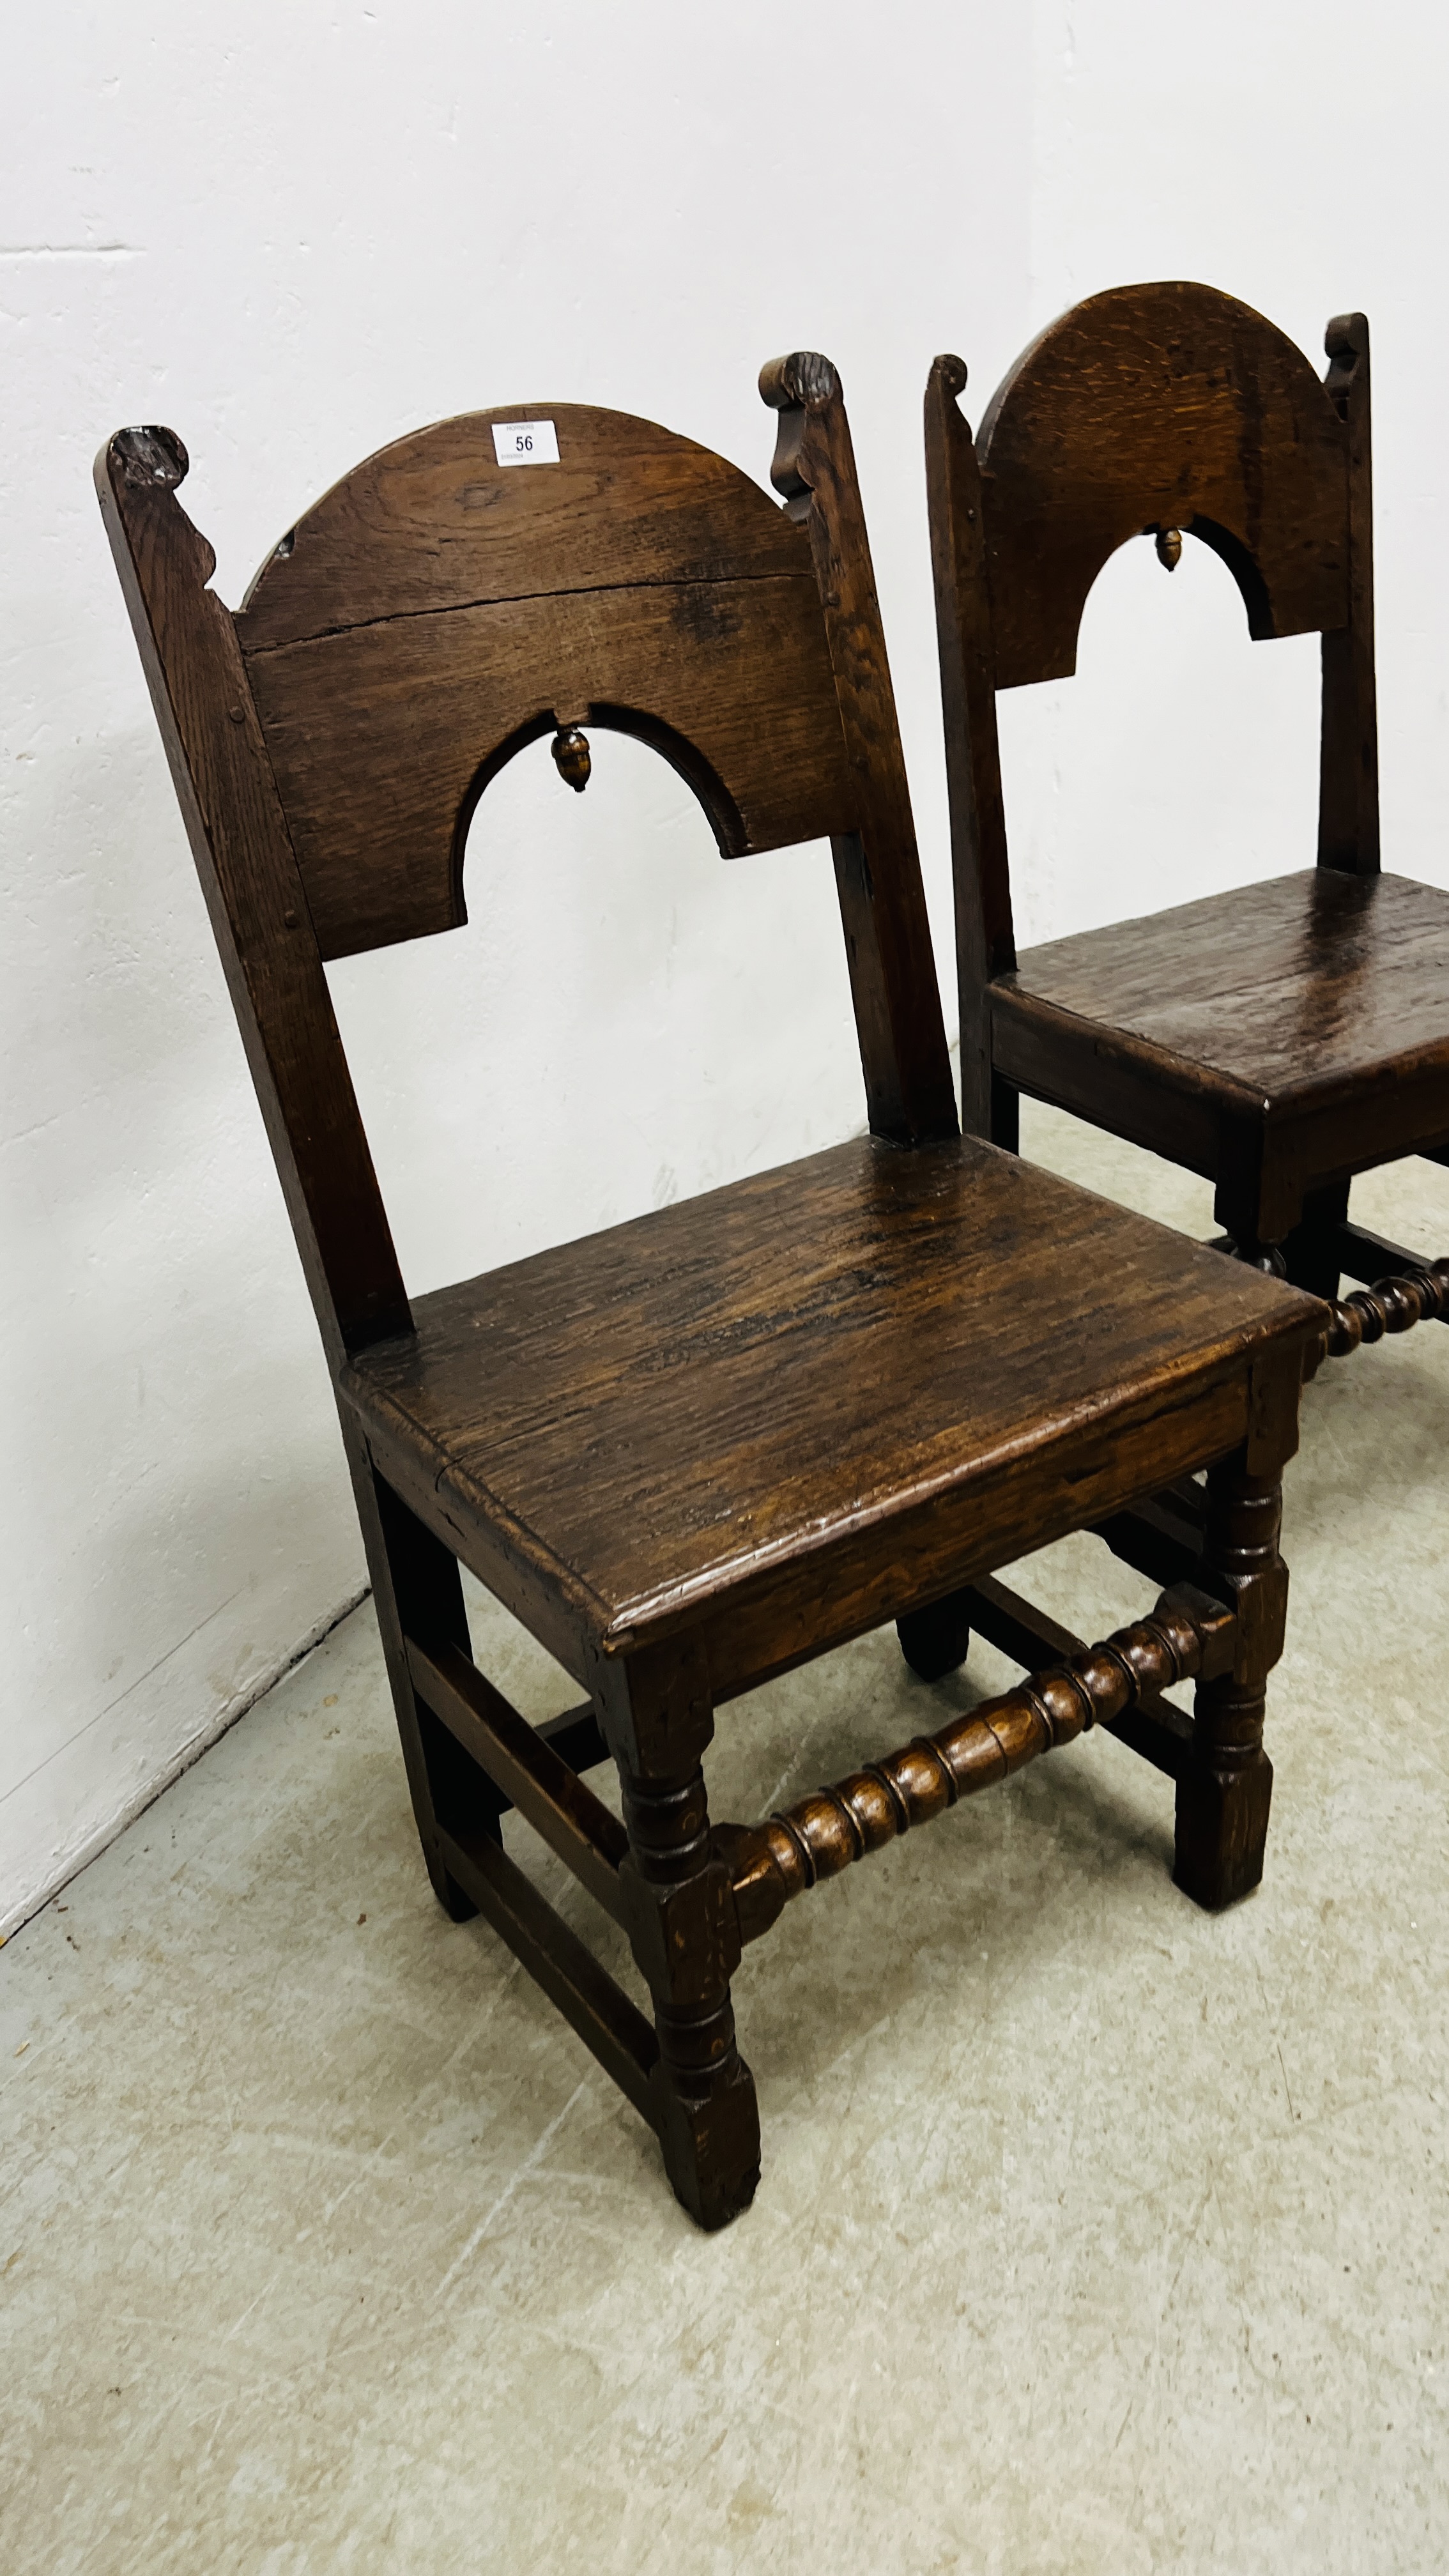 A PAIR OF 17TH CENTURY JOINED OAK CHAIRS, POSSIBLY NORTH COUNTRY. - Image 3 of 20